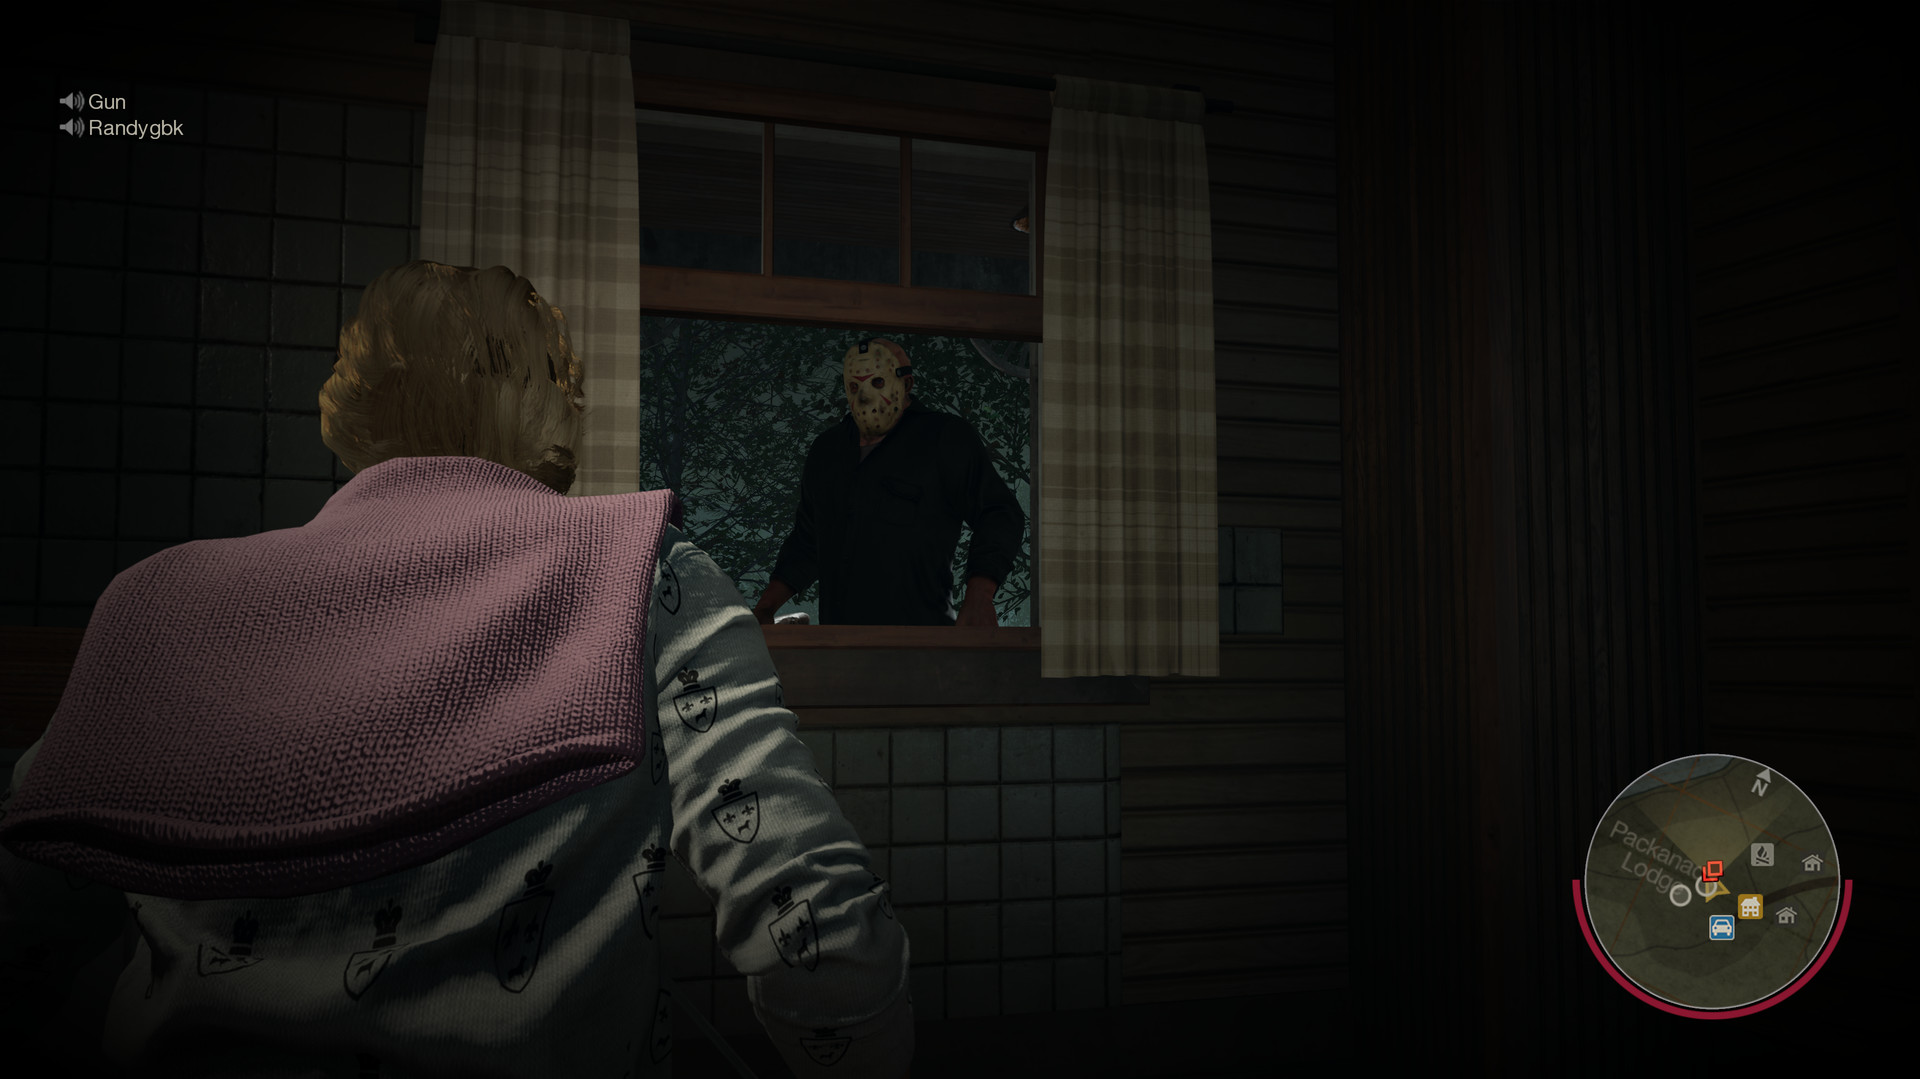 Friday The 13th Game Download Free For Pc Windows 7, 8, 10